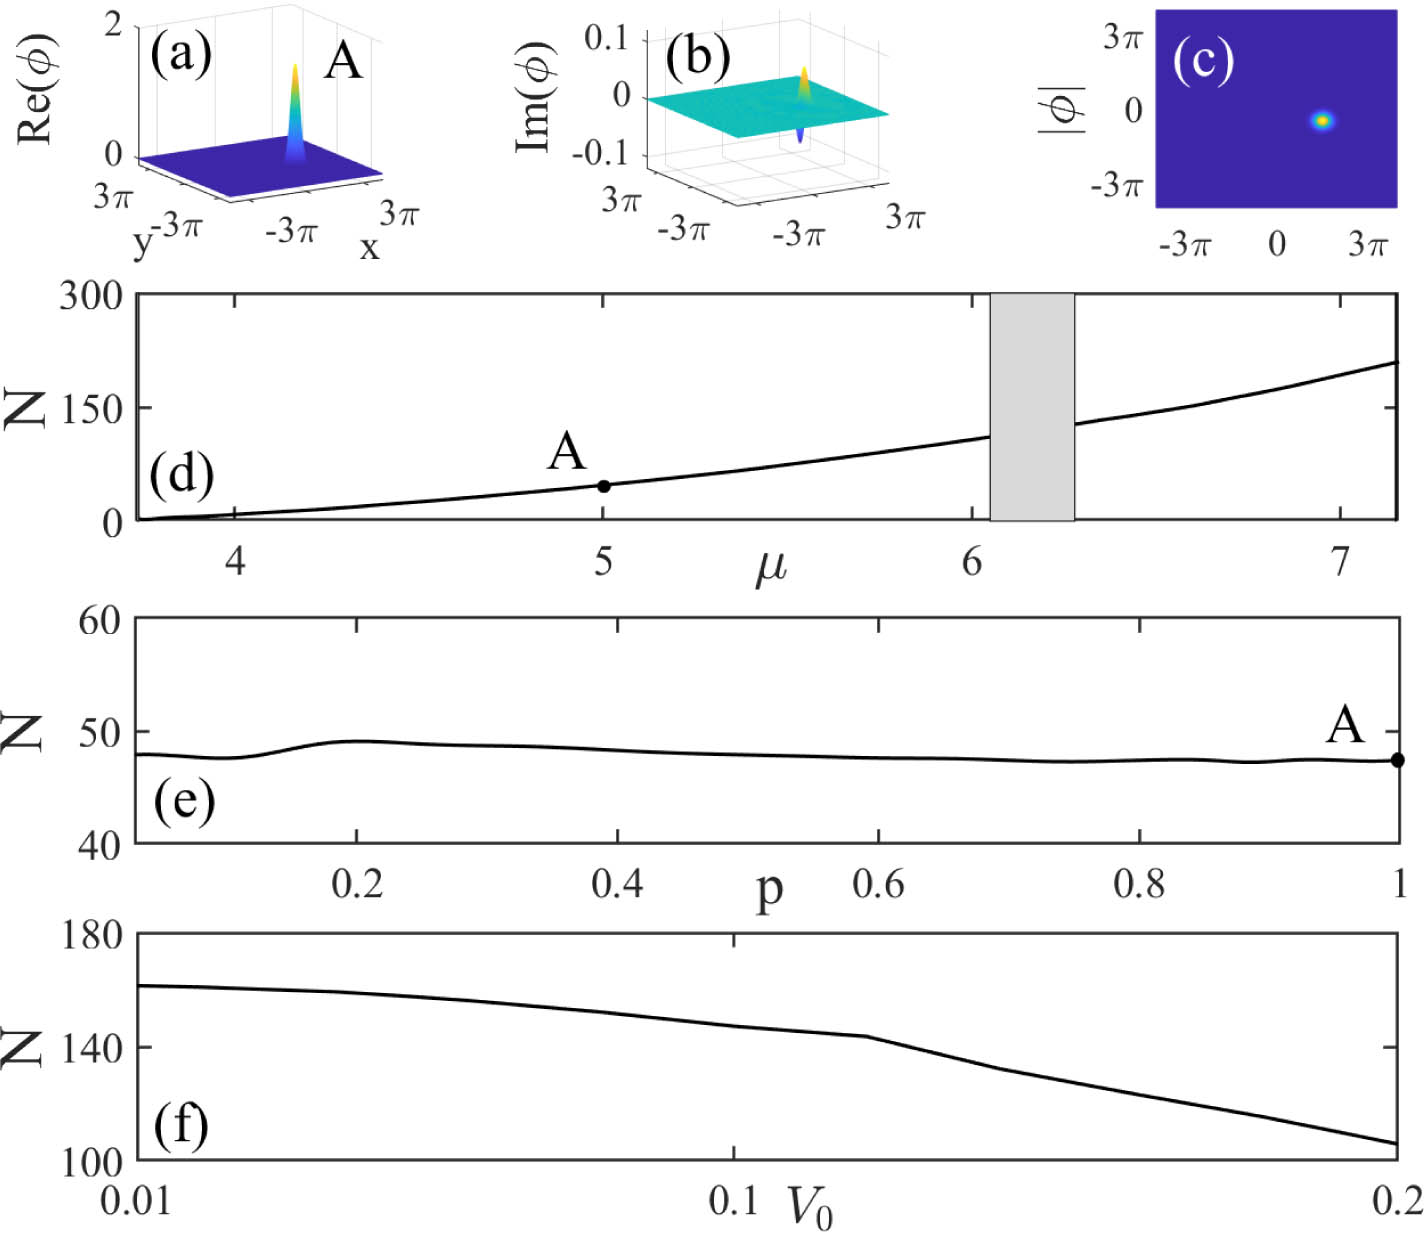 Typical profile of a fundamental GS supported by the 2D PT symmetric moiré optical lattice at θ=arctan(3/4) (a)–(c). Corresponding real (a) and imaginary (b) parts, and contour plot of the module (c). Condensate population, N, as a function of chemical potential μ (d), strength contrast p (e), and imaginary potential strength V0 (f) at θ=arctan(3/4). Other parameters: μ=5, N=47.4 in (a)–(c). μ=6.7 in (f).